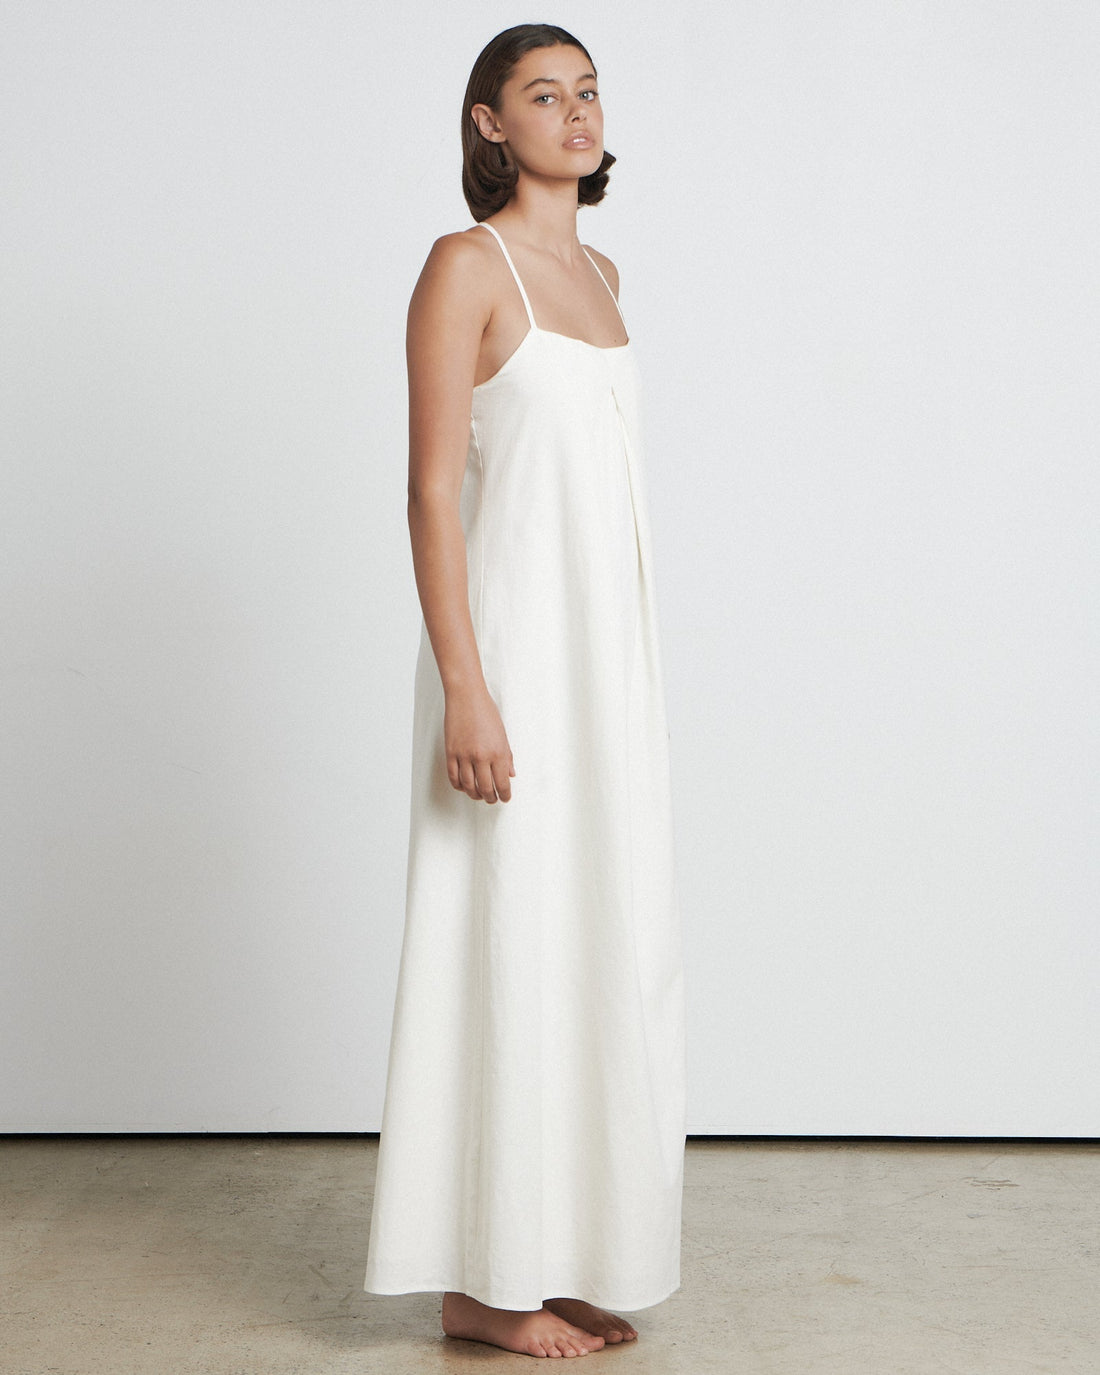 CHARLIE HOLIDAY THE TIE BACK MAXI DRESS - COCONUT MILK